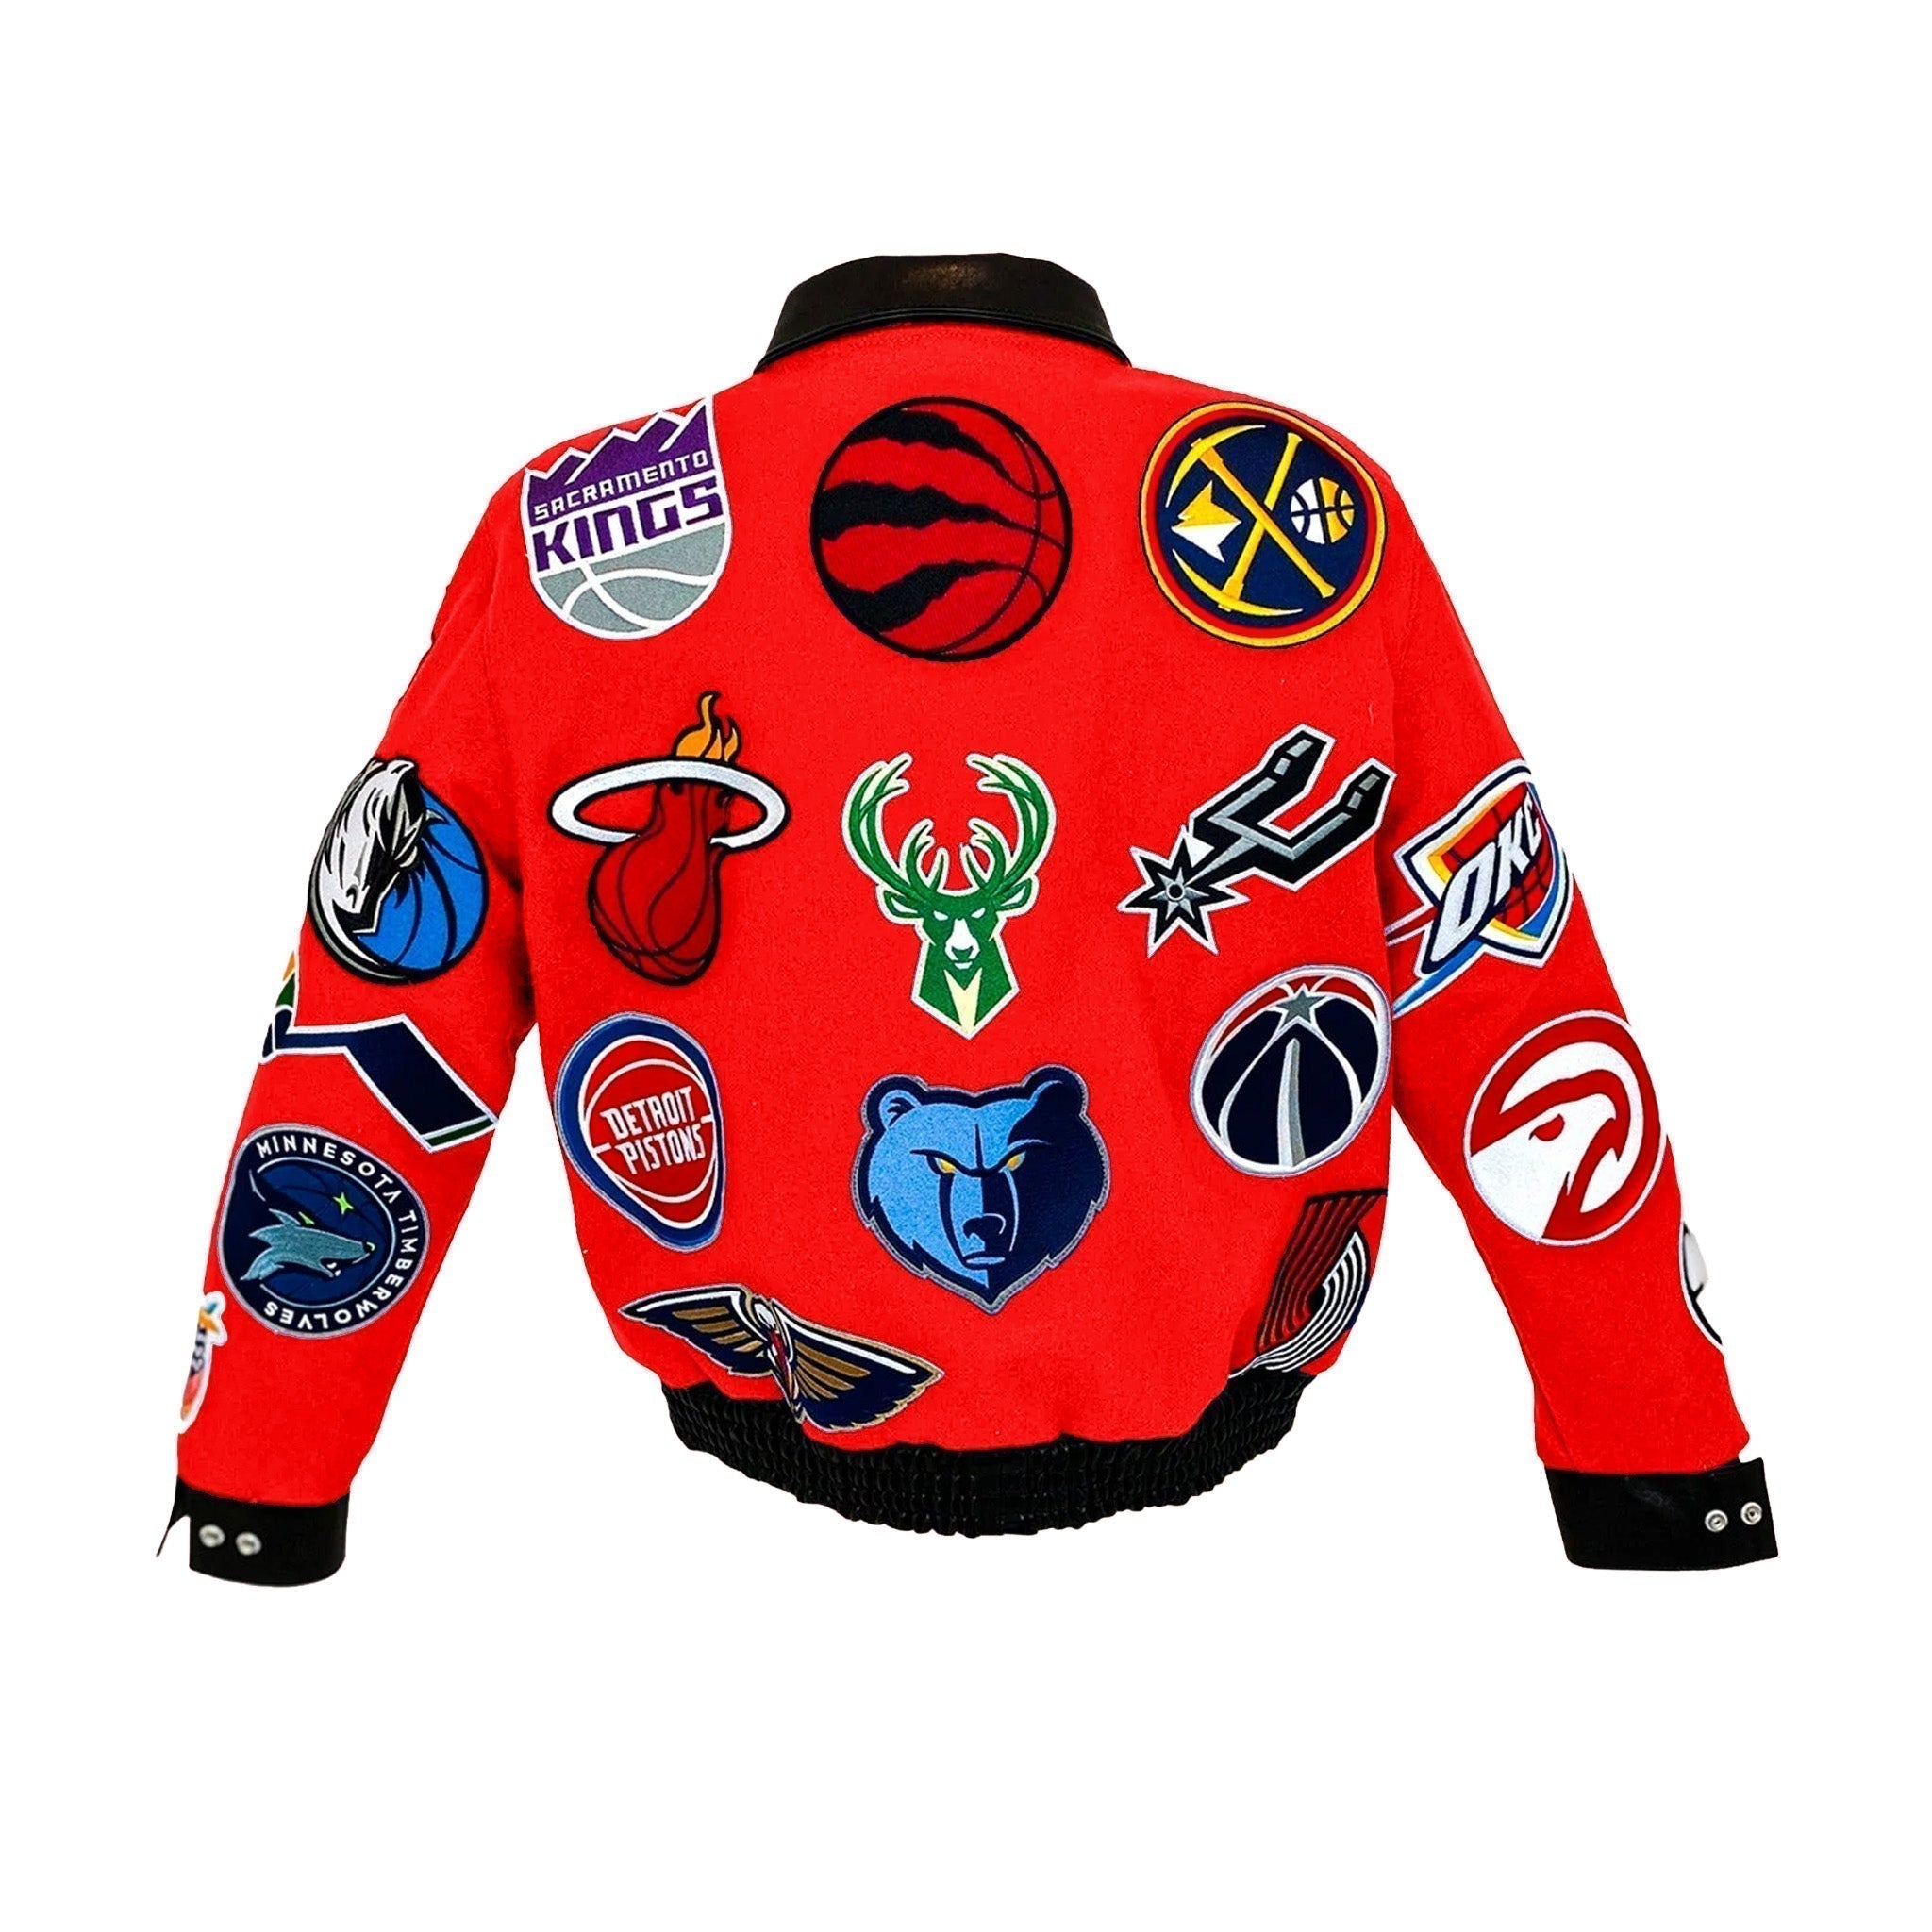 Maker of Jacket Fashion Jackets Red NBA Teams Collage Jeff Hamilton Leather